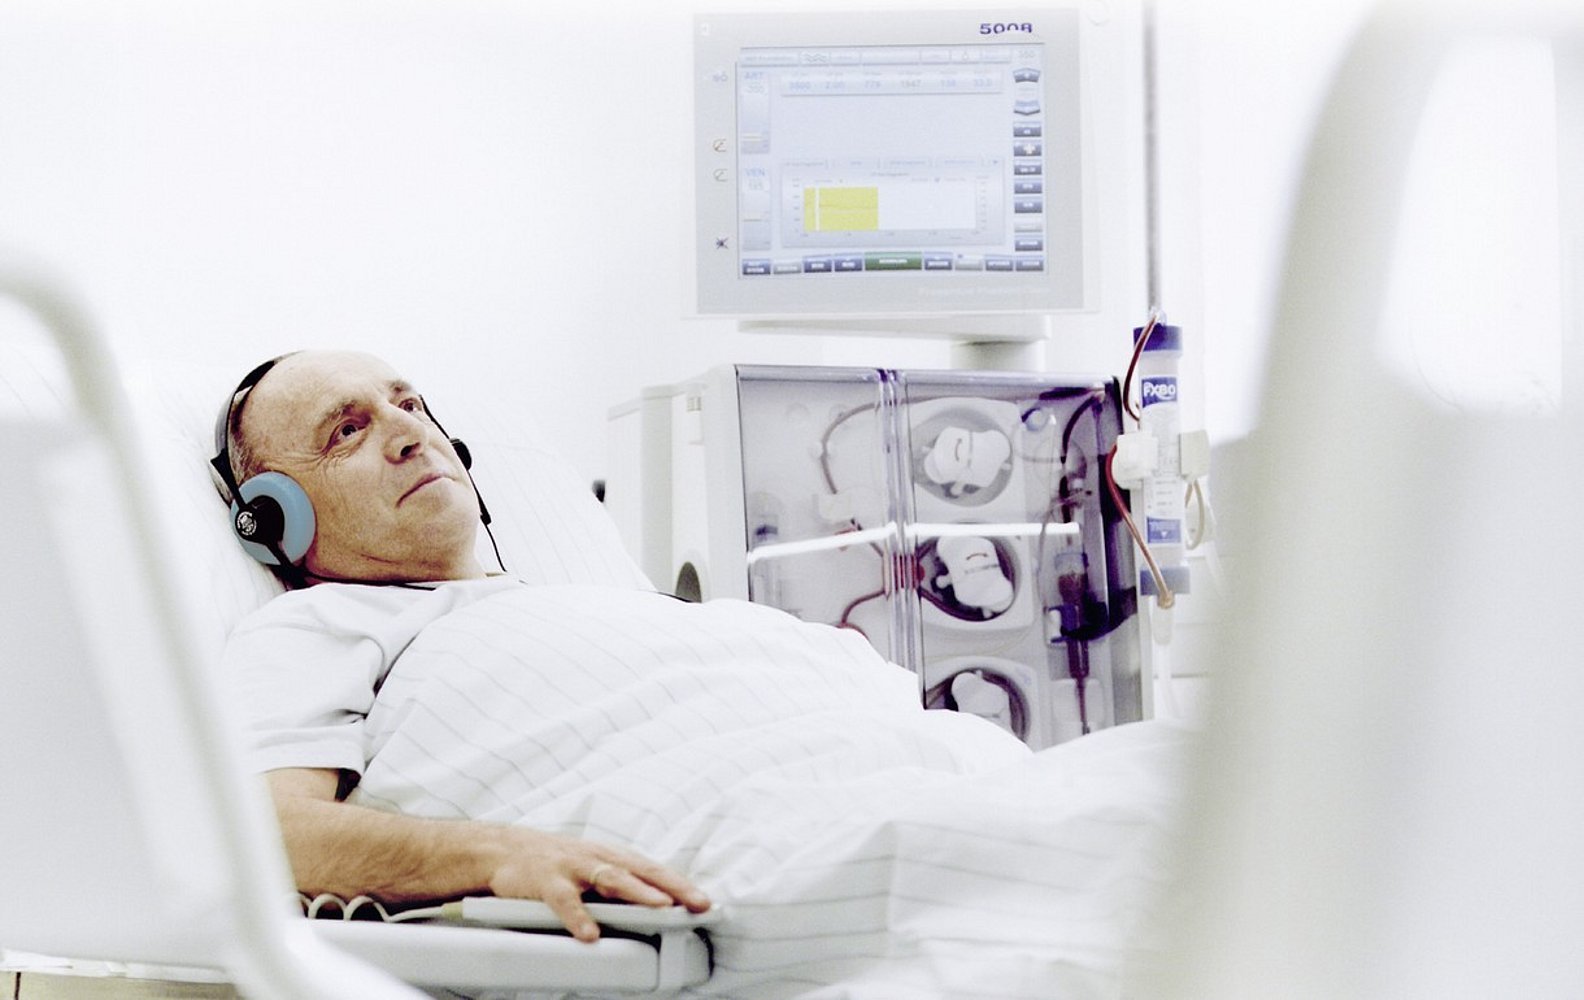 Patient during in-center dialysis